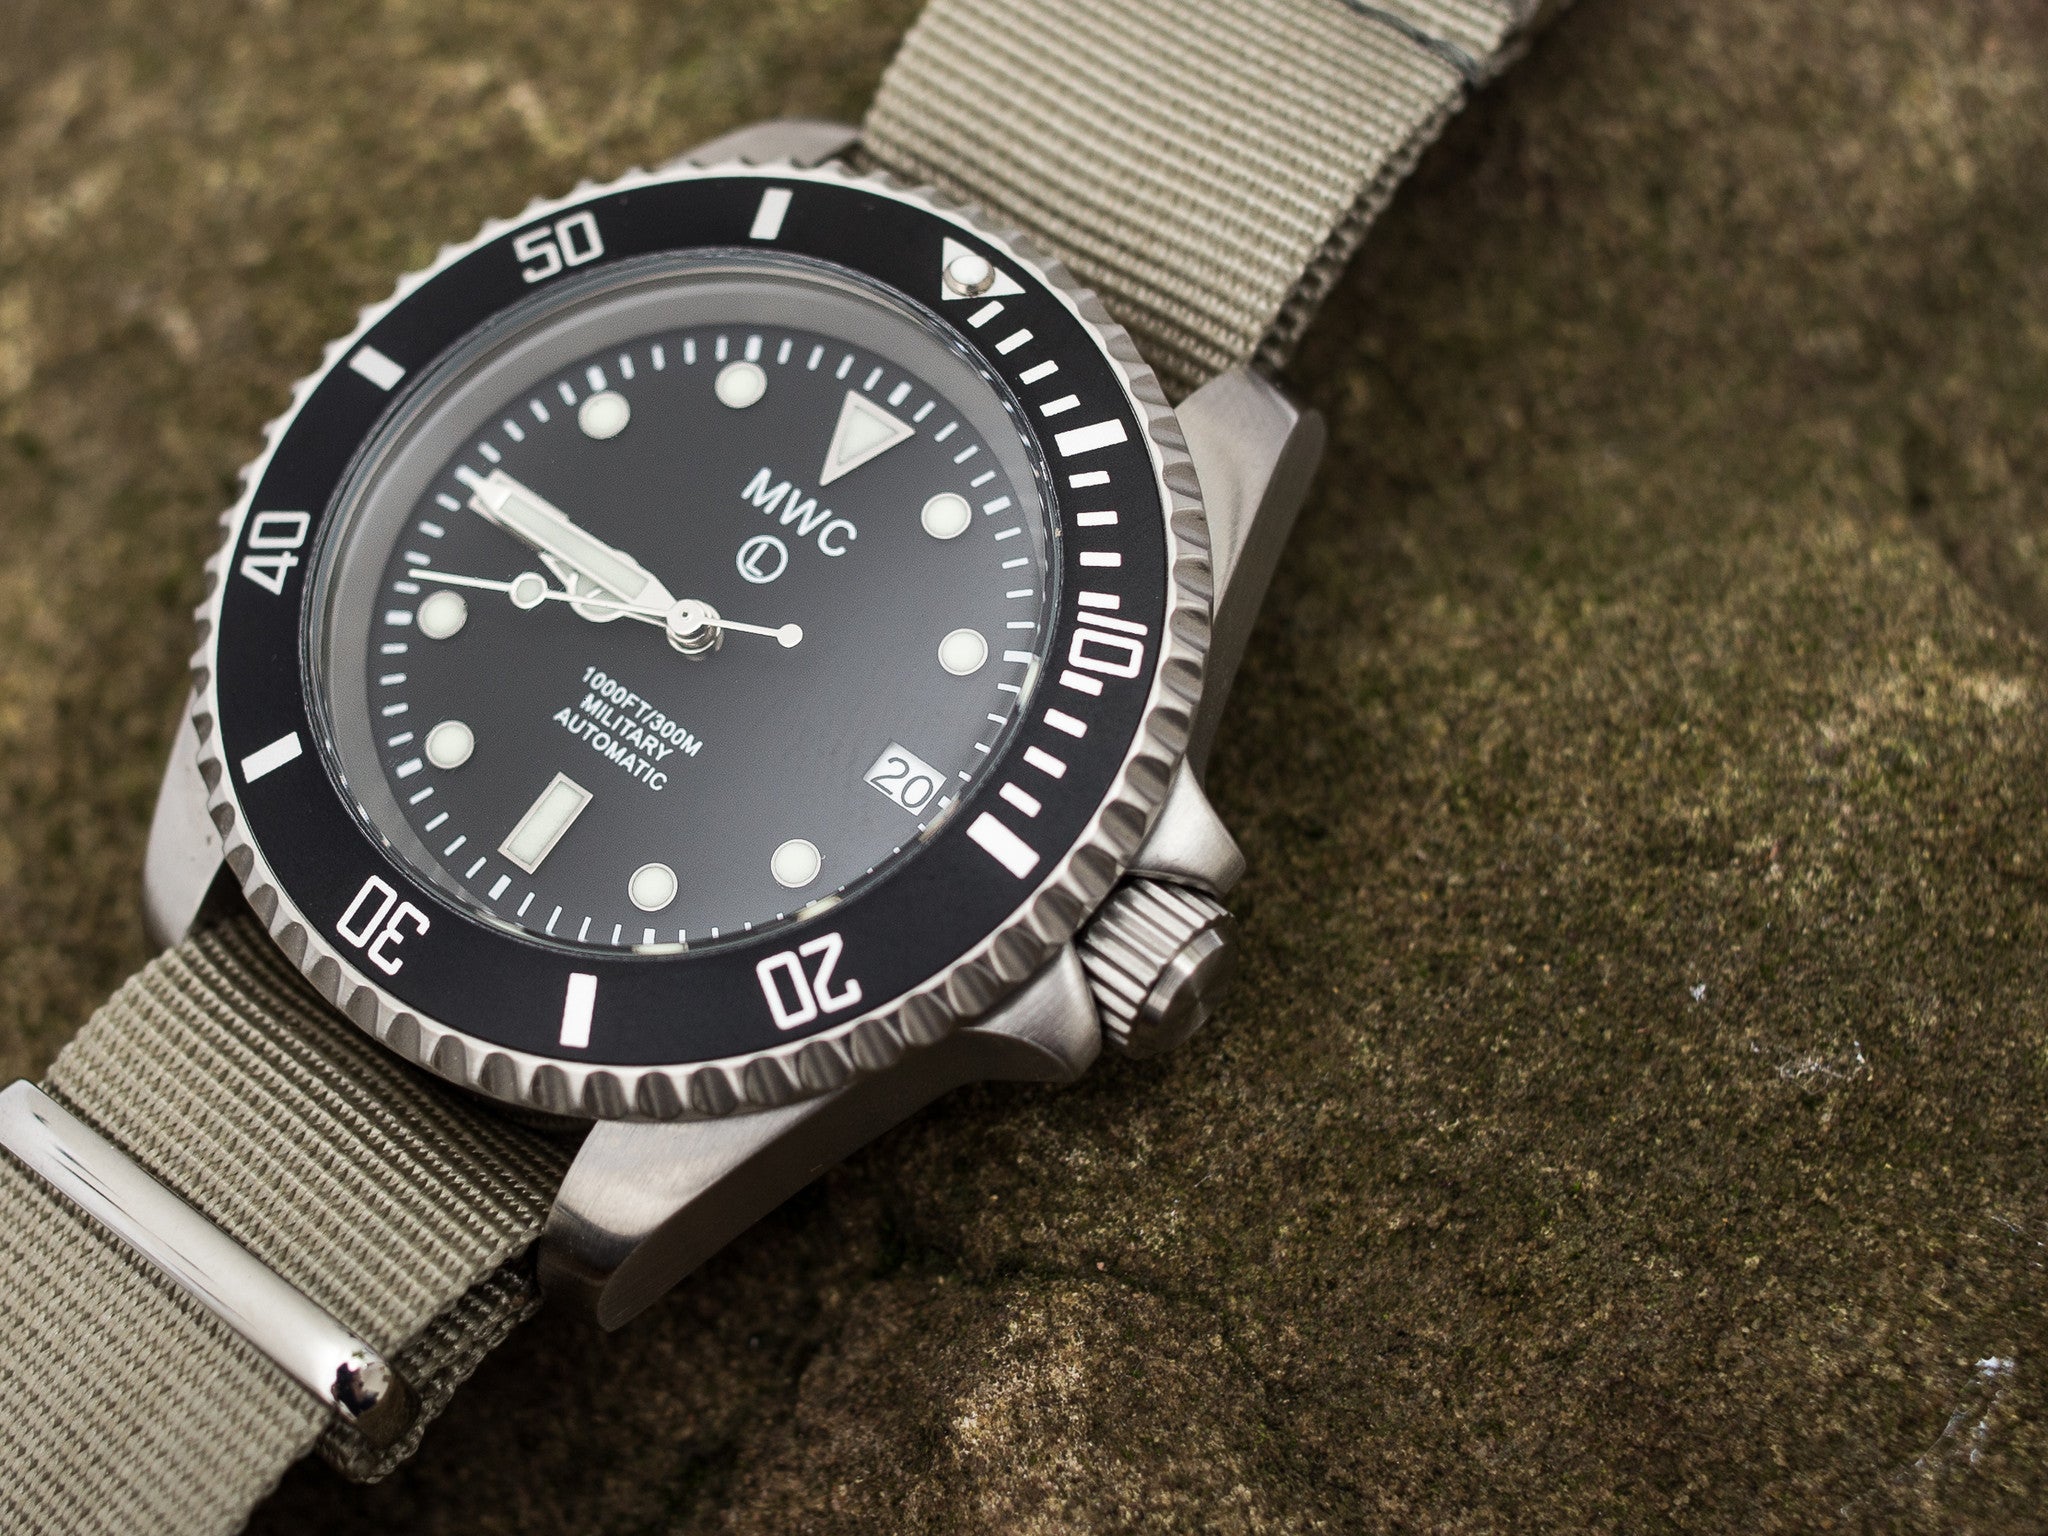 MWC 21 Jewel 300m Automatic Military Divers Watch with Sapphire Crysta ...